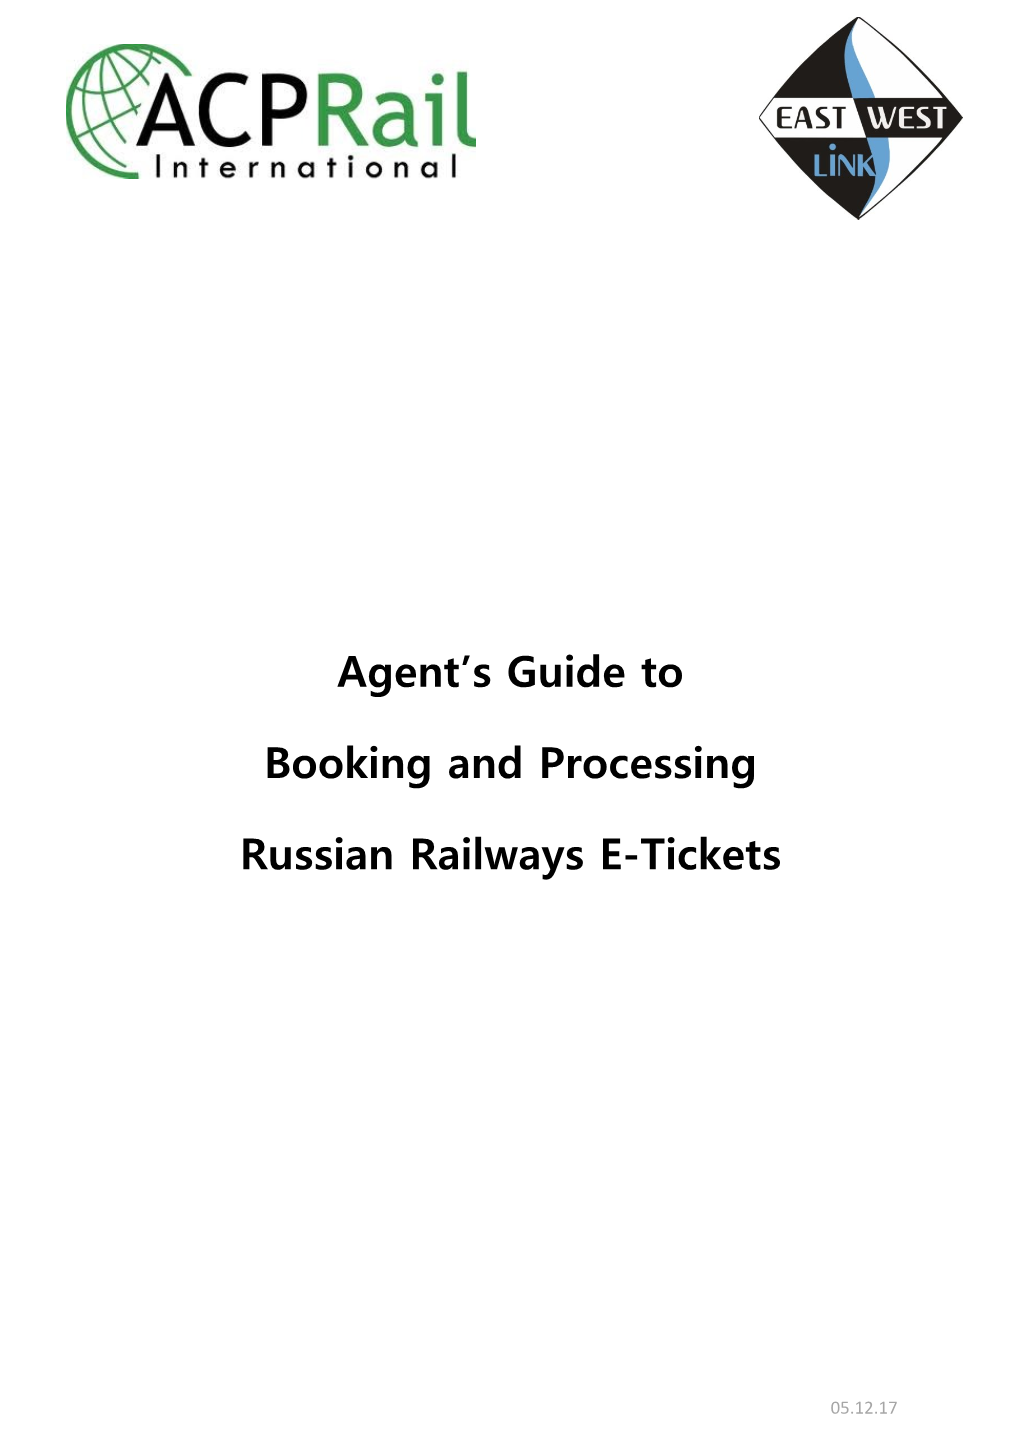 Agent's Guide to Booking and Processing Russian Railways E